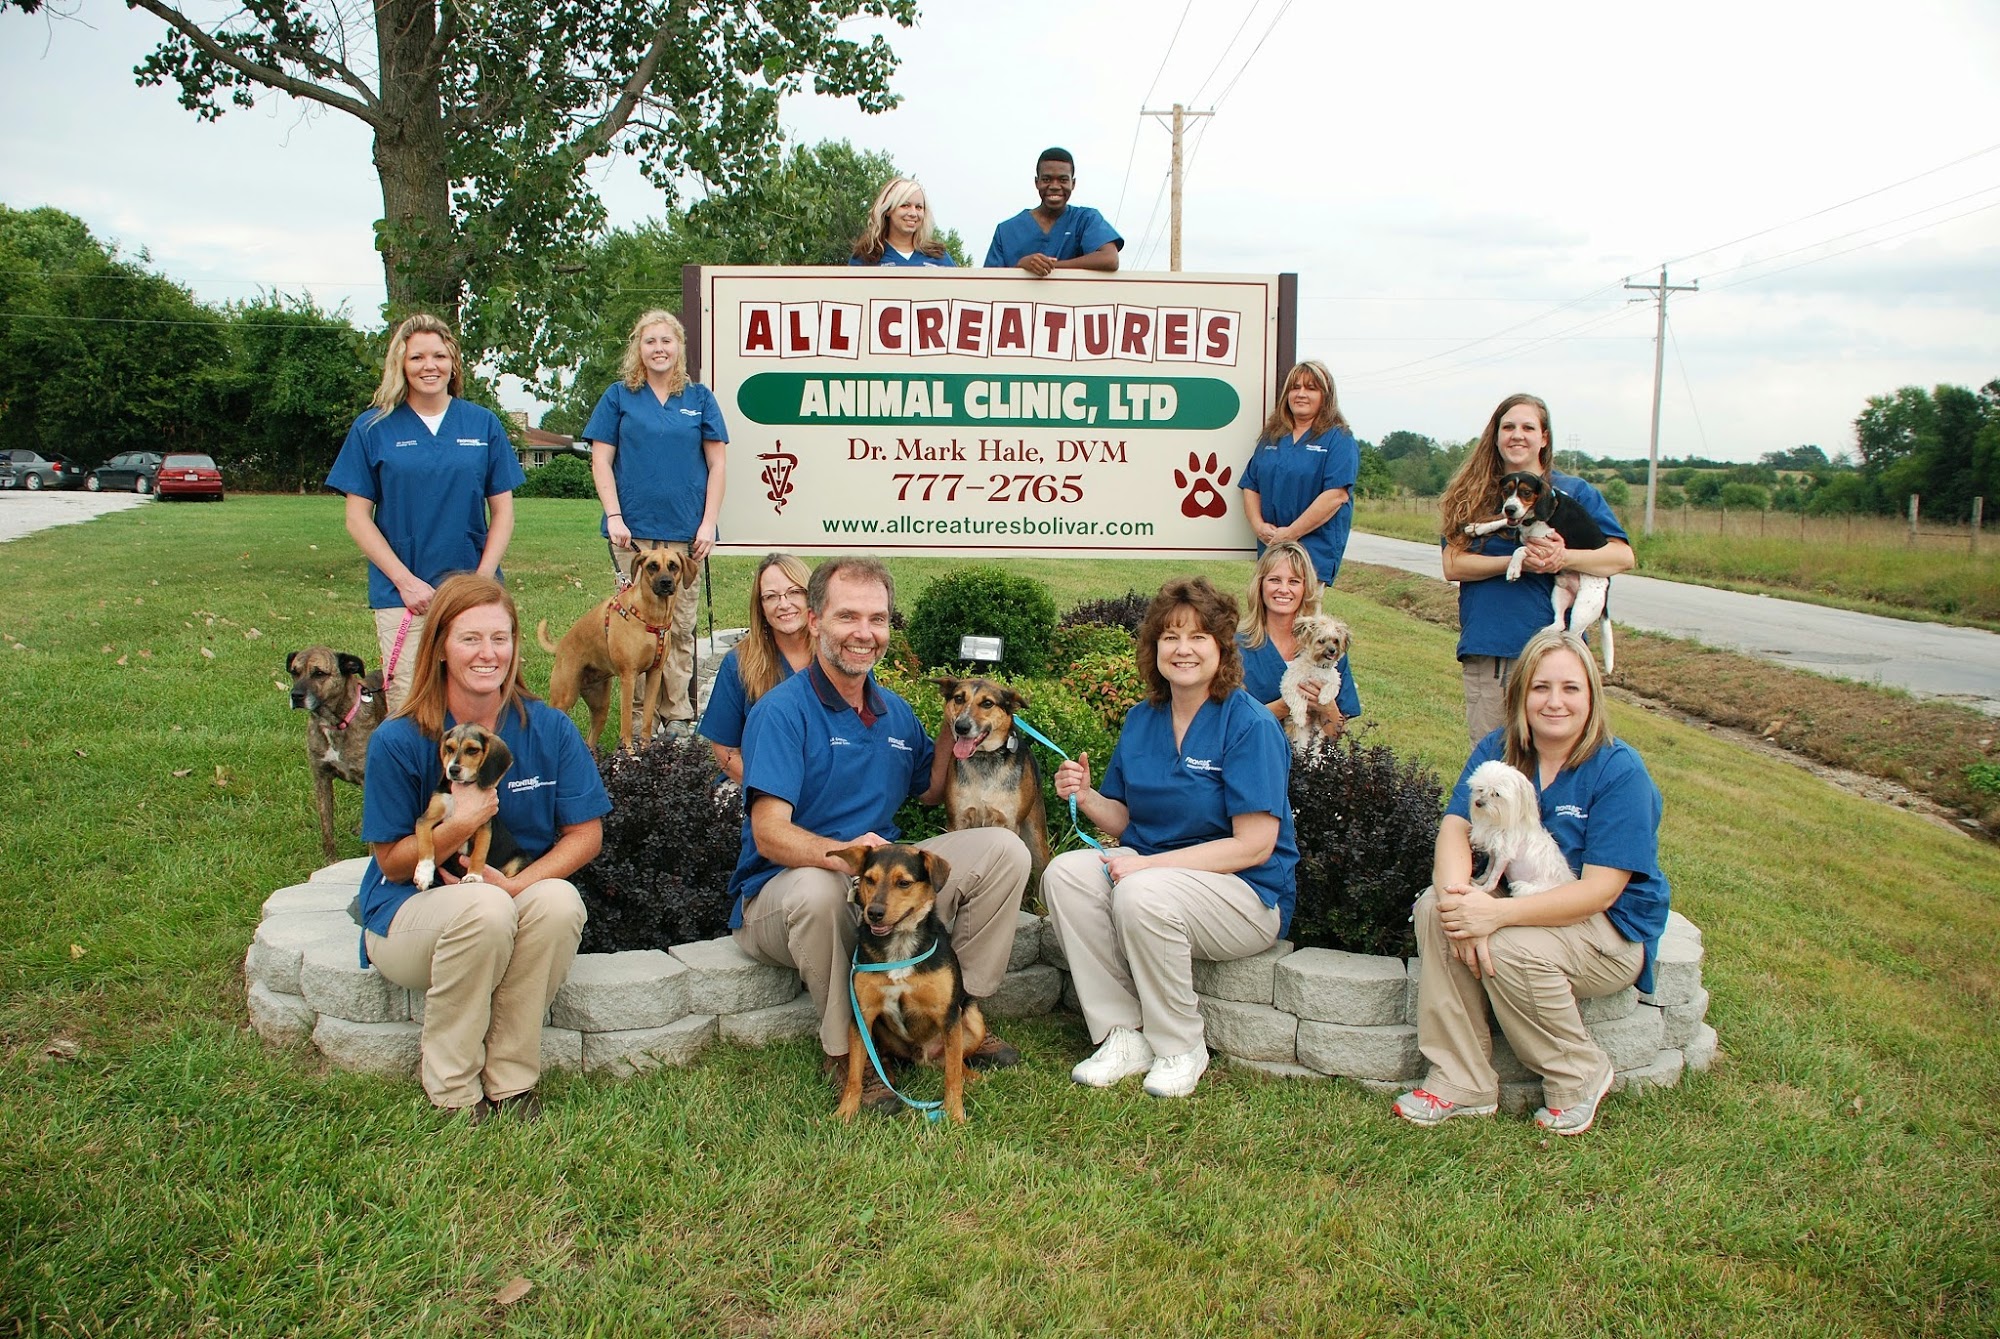 All Creatures Animal Clinic